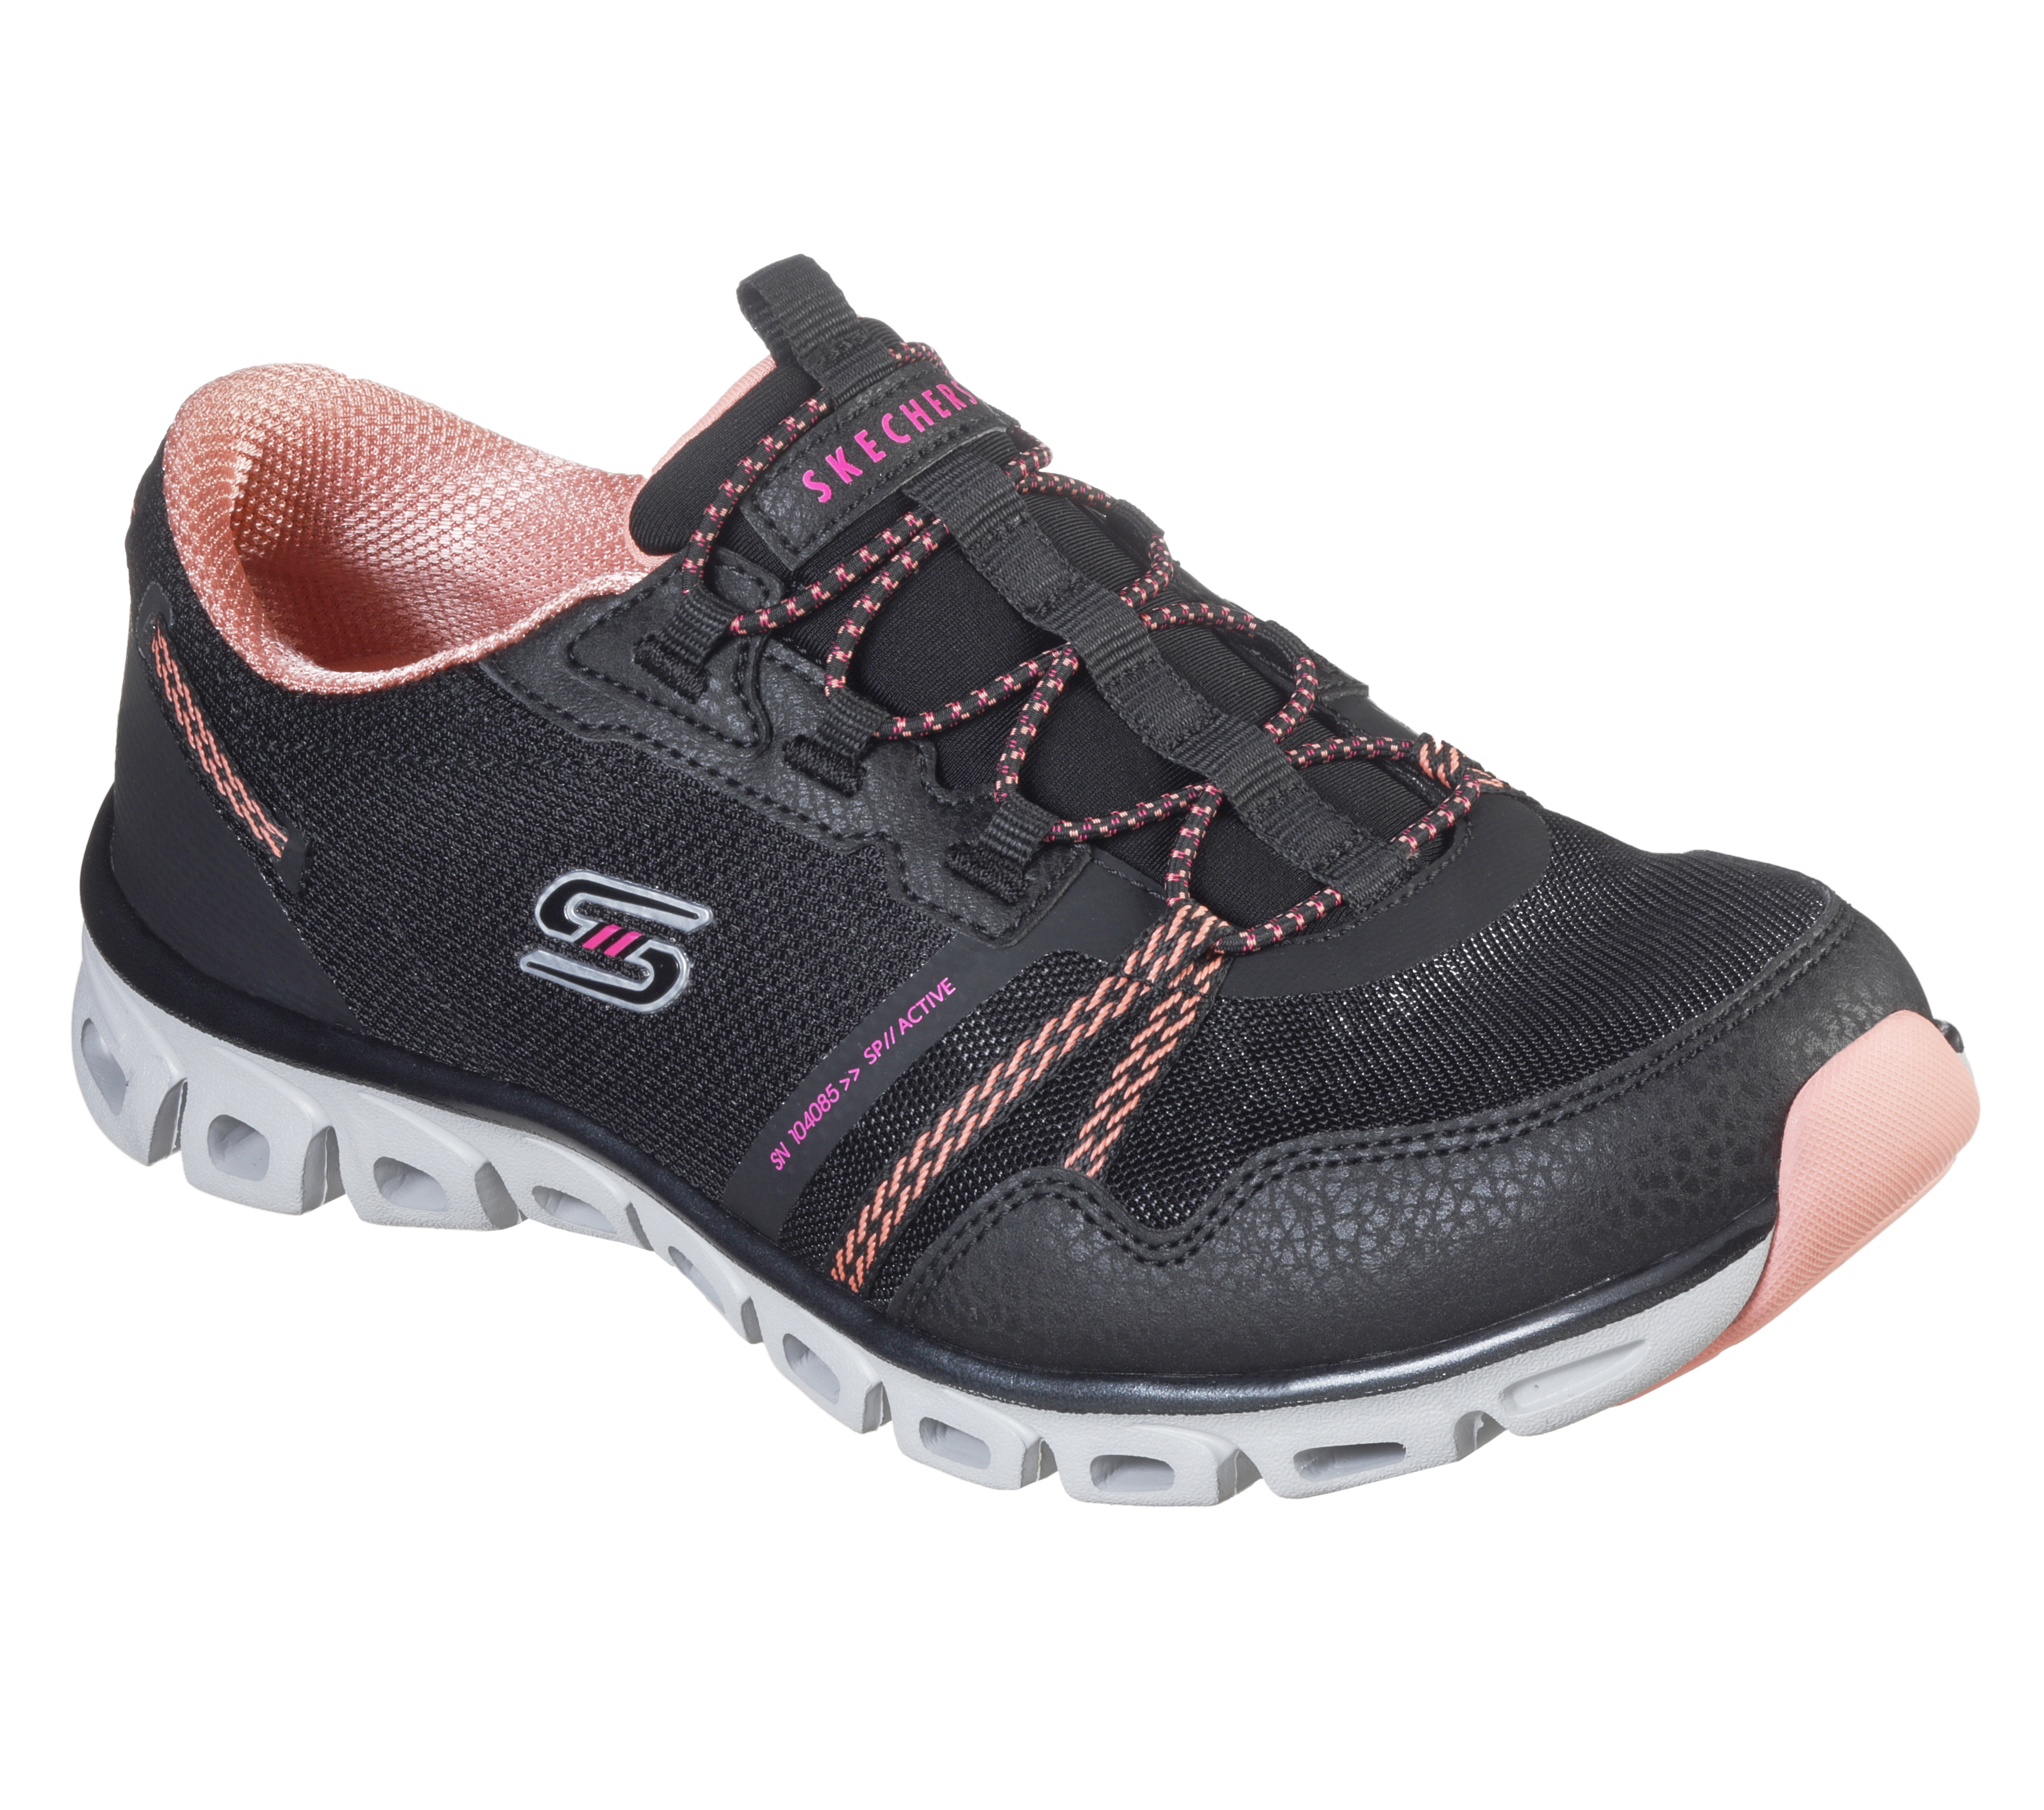 Shop the Glide-Step - Act Nice | SKECHERS